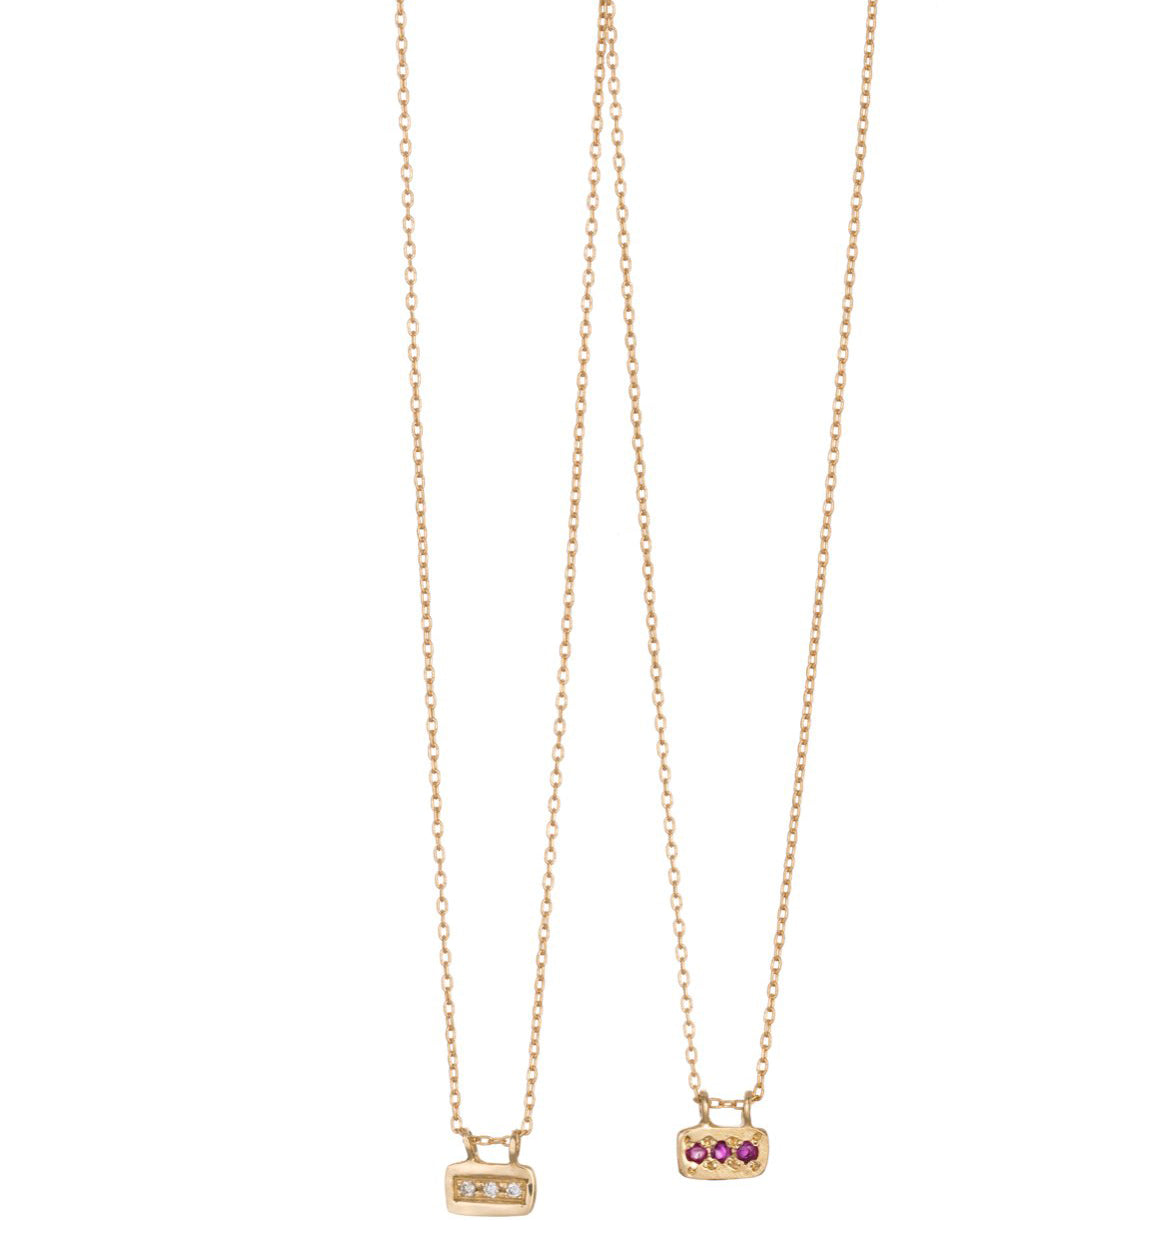 Horizontal Three Necklace - 14K solid gold with Rubies, Sapphires, Emeralds, or White VS1 Diamonds